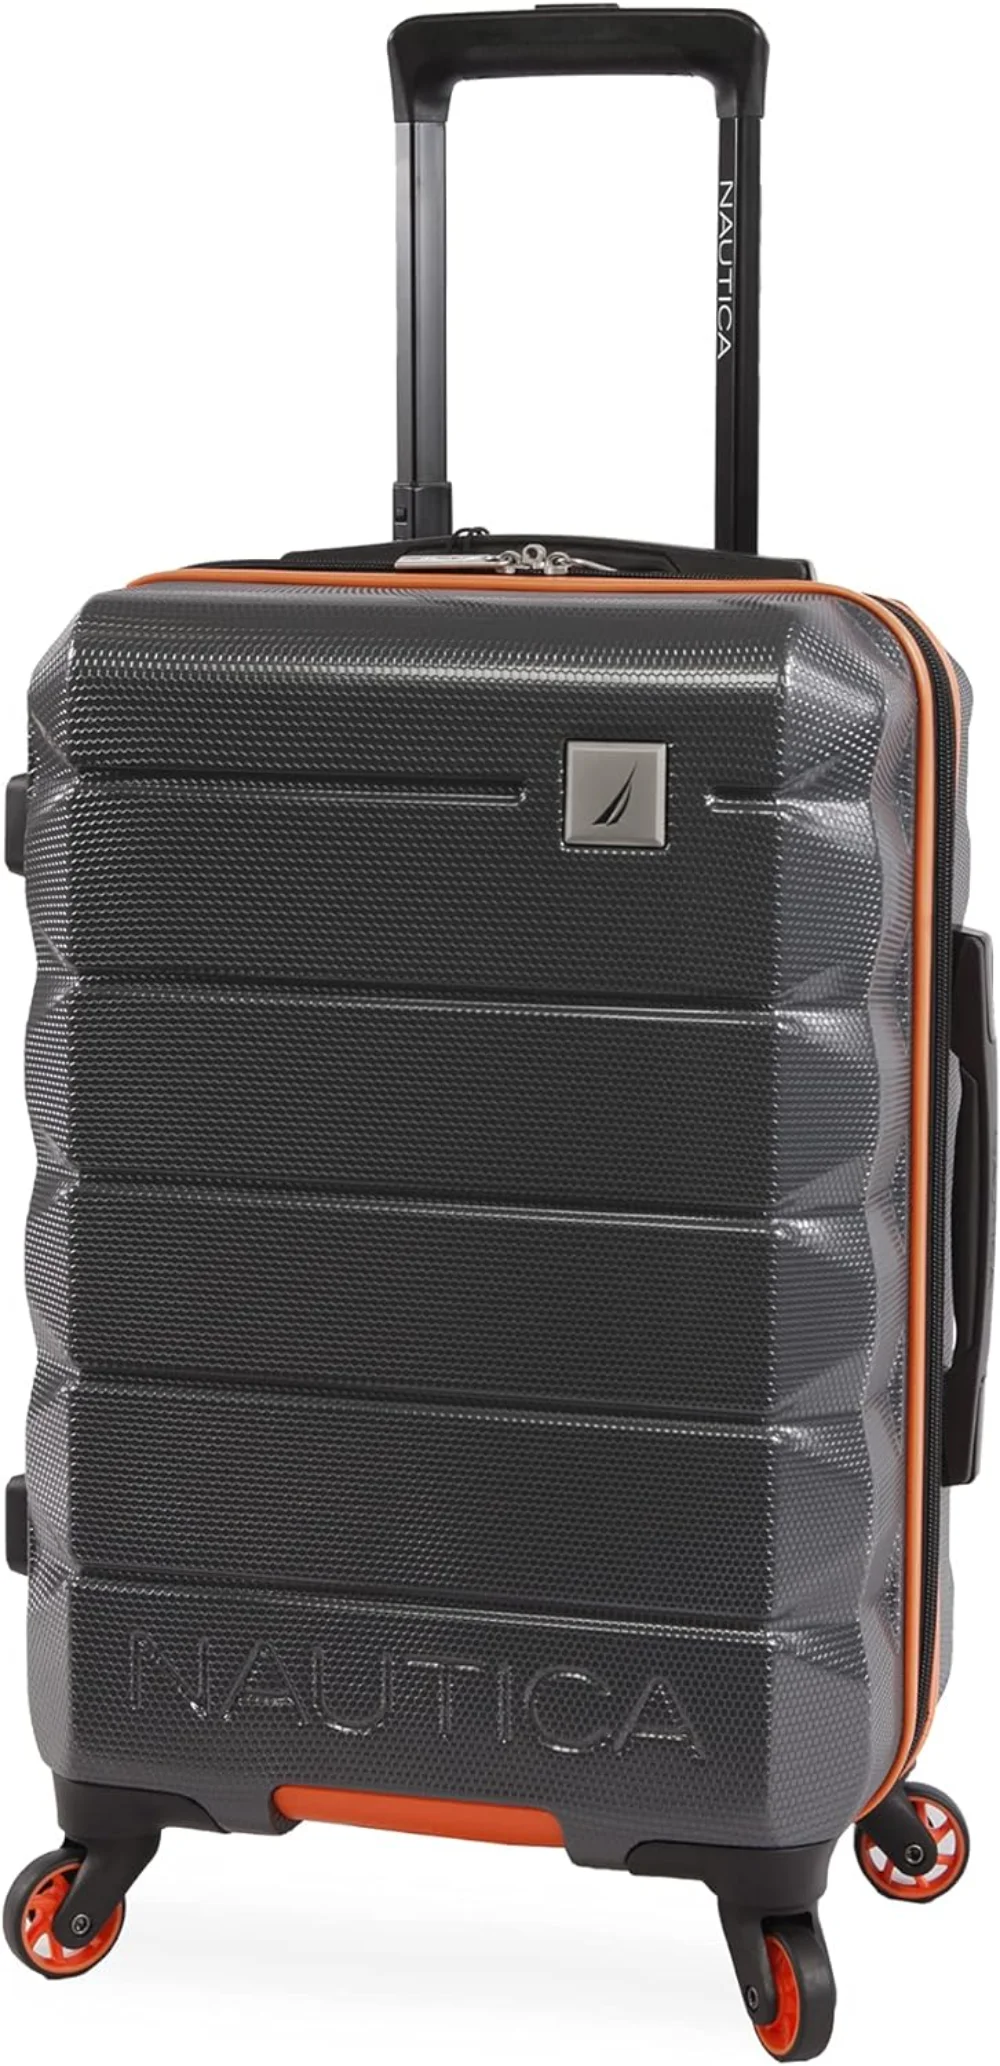 NAUTICA Quest Hardside Spinner Luggage, Grey/Orange, Accent Colored 4-Wheel 360 Degree Spinner Carry-On 21-Inch Sets Luggage